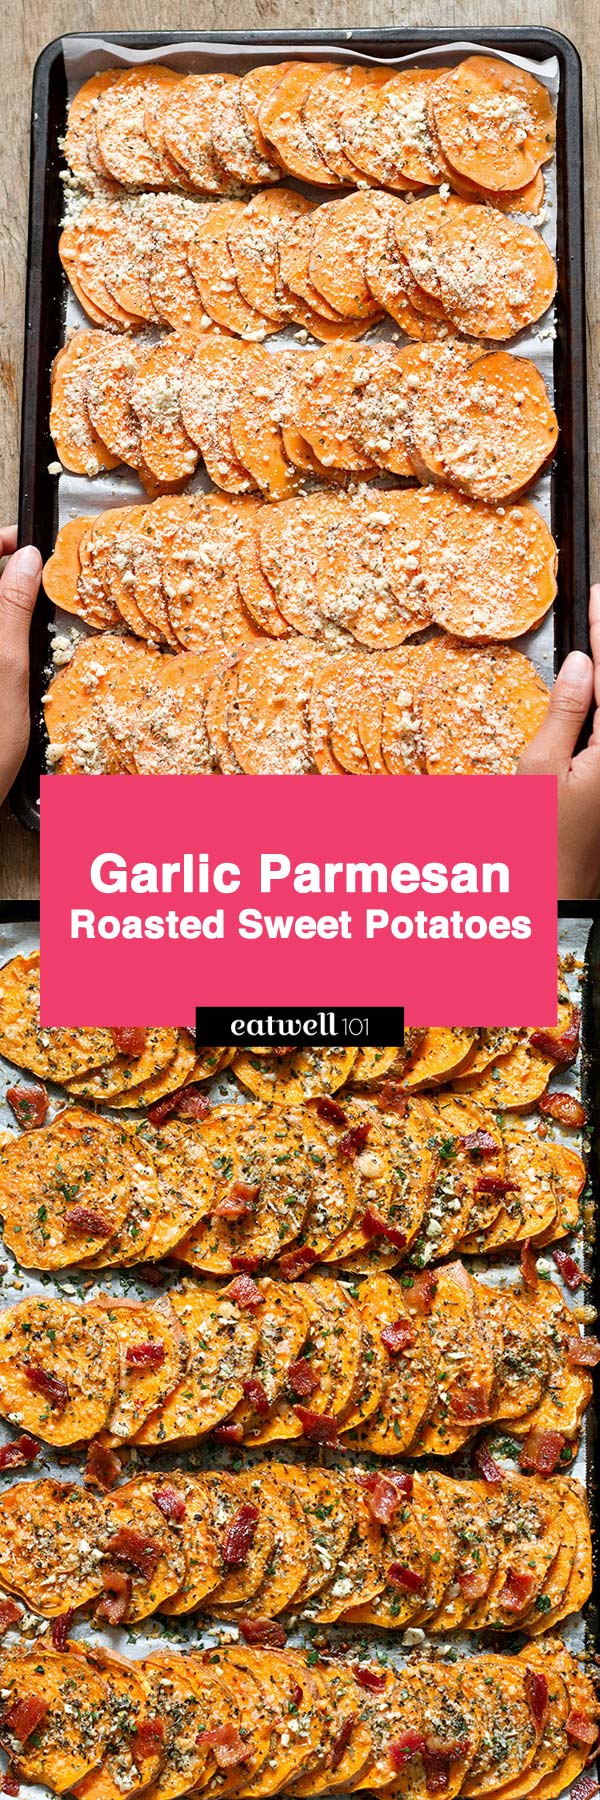 Garlic Parmesan Roasted Sweet Potatoes - #sweet-potato #recipe #eatwell101 - This roasted sweet potatoes recipe makes for a quick easy side for any occasion. You'll never wan to make roasted sweet potatoes differently!